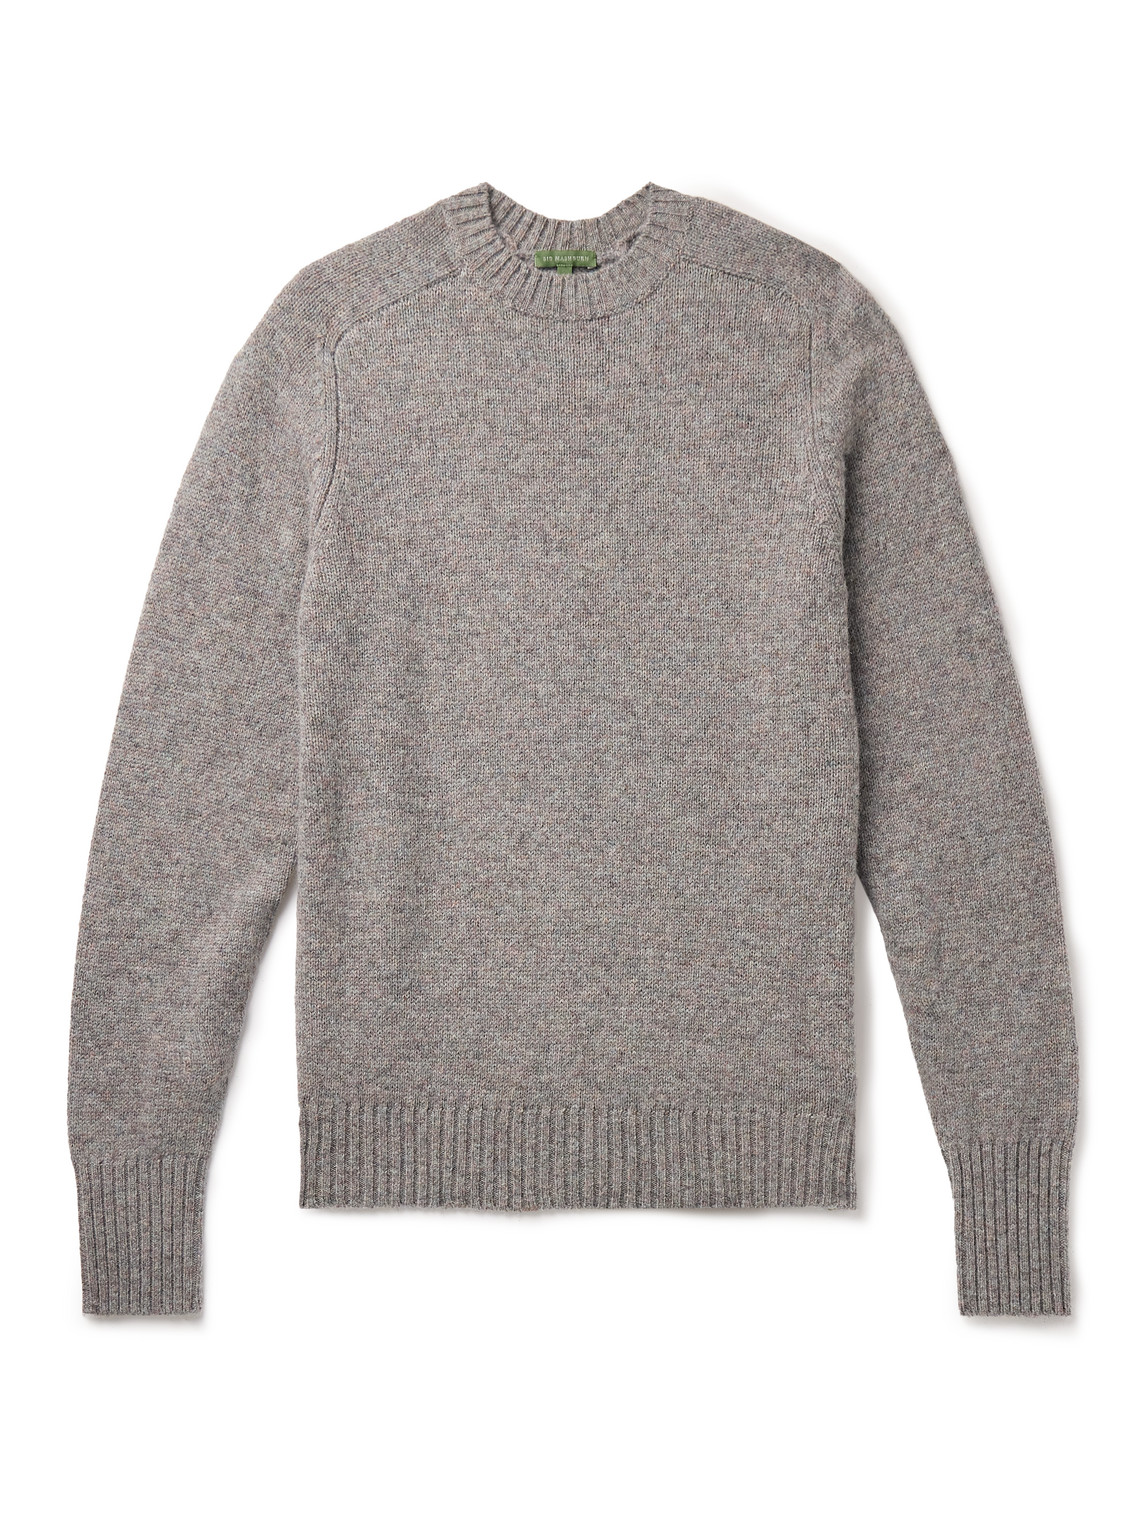 Sid Mashburn Knitted Wool Sweater In Gray